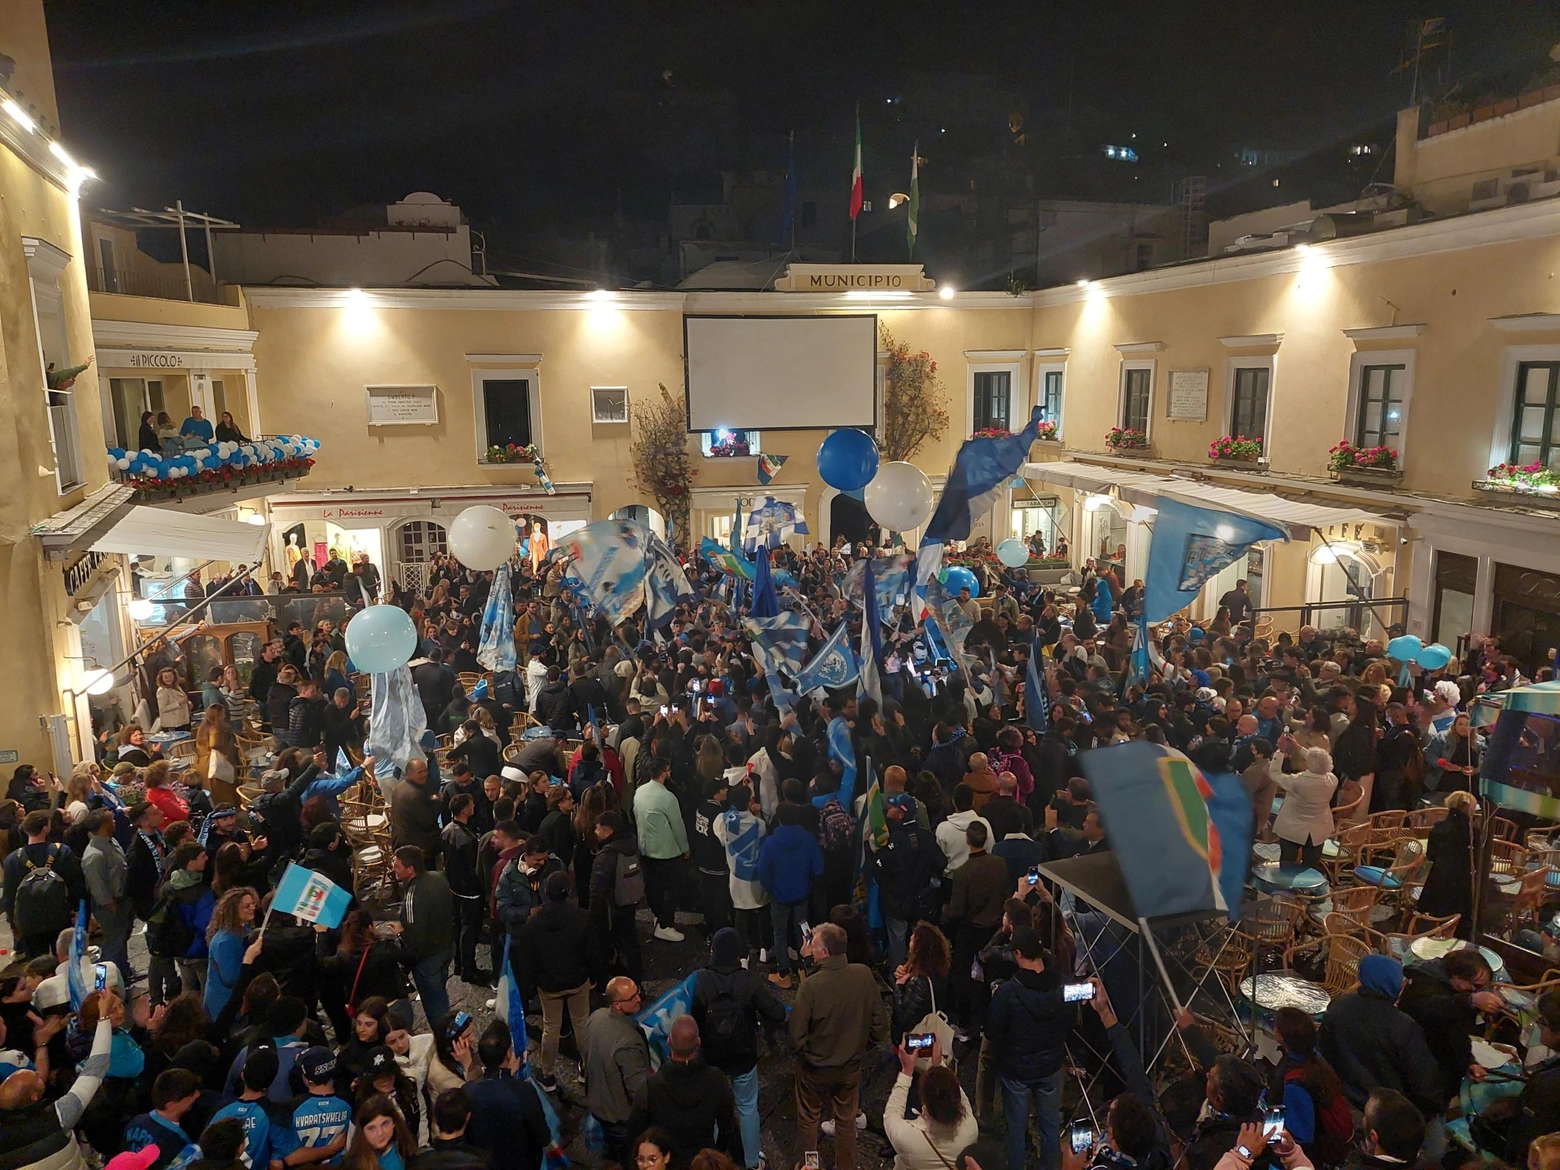 SSC Napoli’s supporters celebrate the victory of the Italian Serie A Championship (Scudetto) at the end of the match against Udinese Calcio in Capri Island, Italy, 04 May 2023.
ANSA/GIUSEPPE CATUOGNO